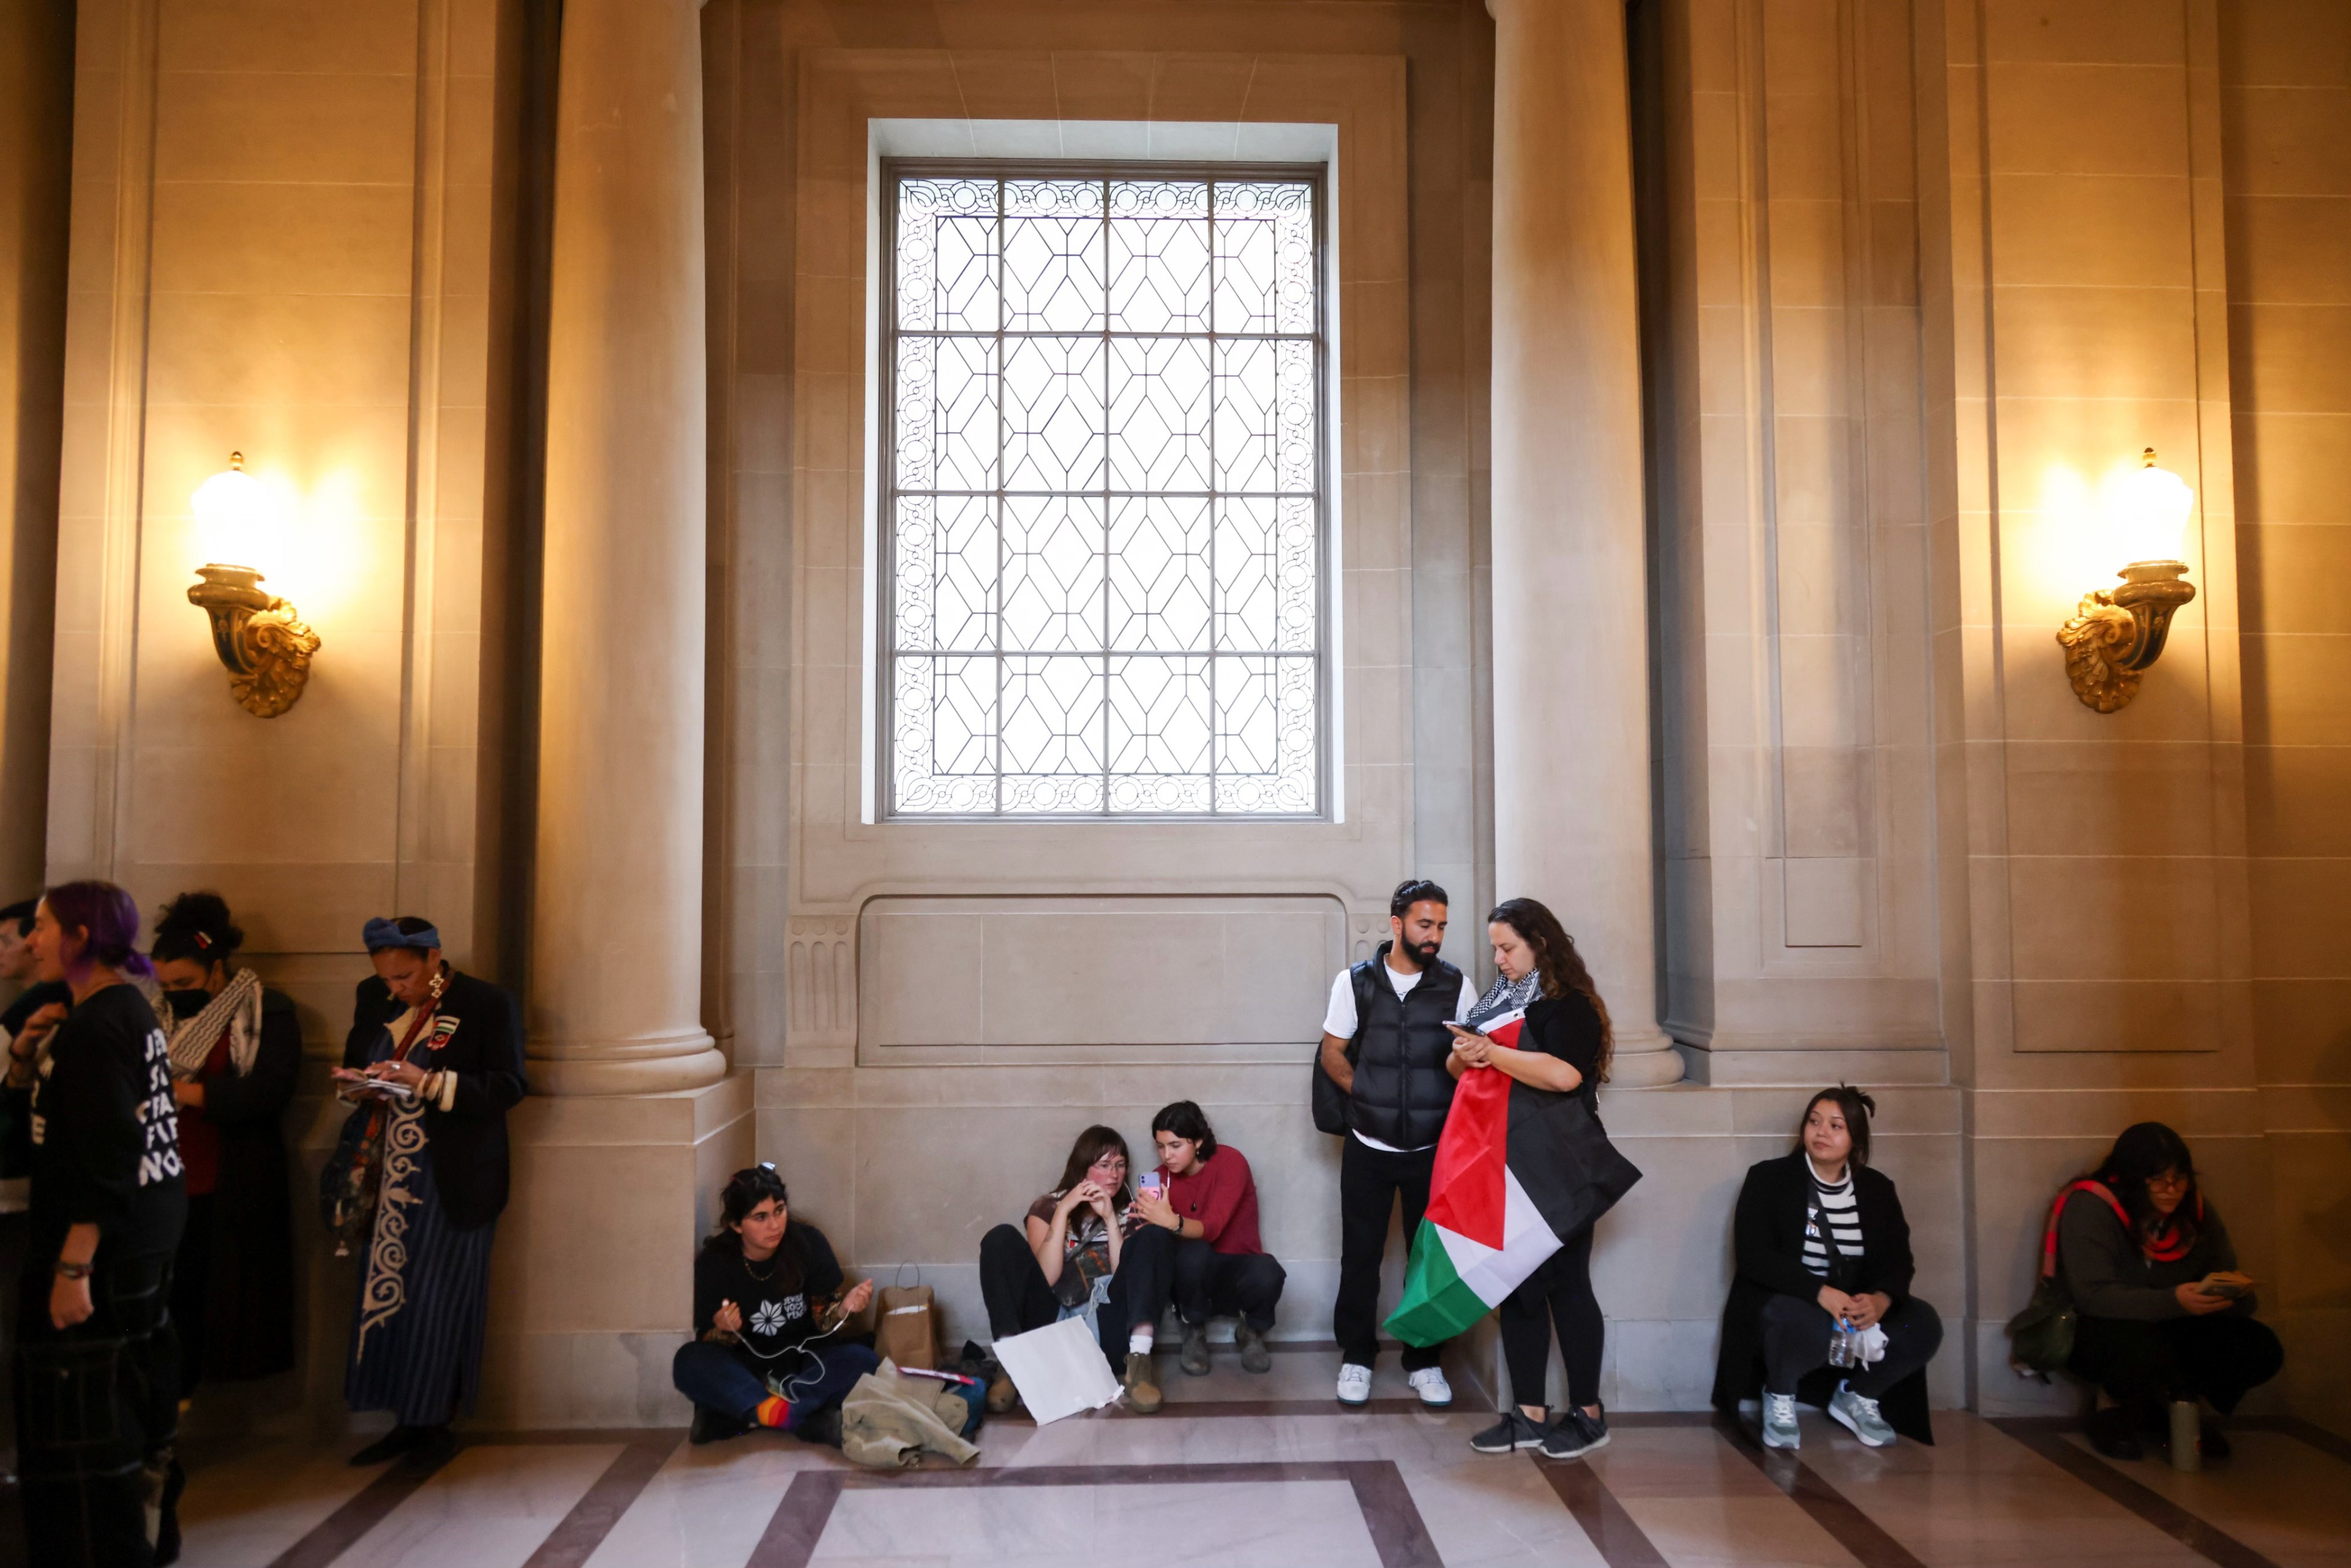 People sit and stand in a hall with tall walls, a large window, and ornate sconces. Two are holding a Palestinian flag.